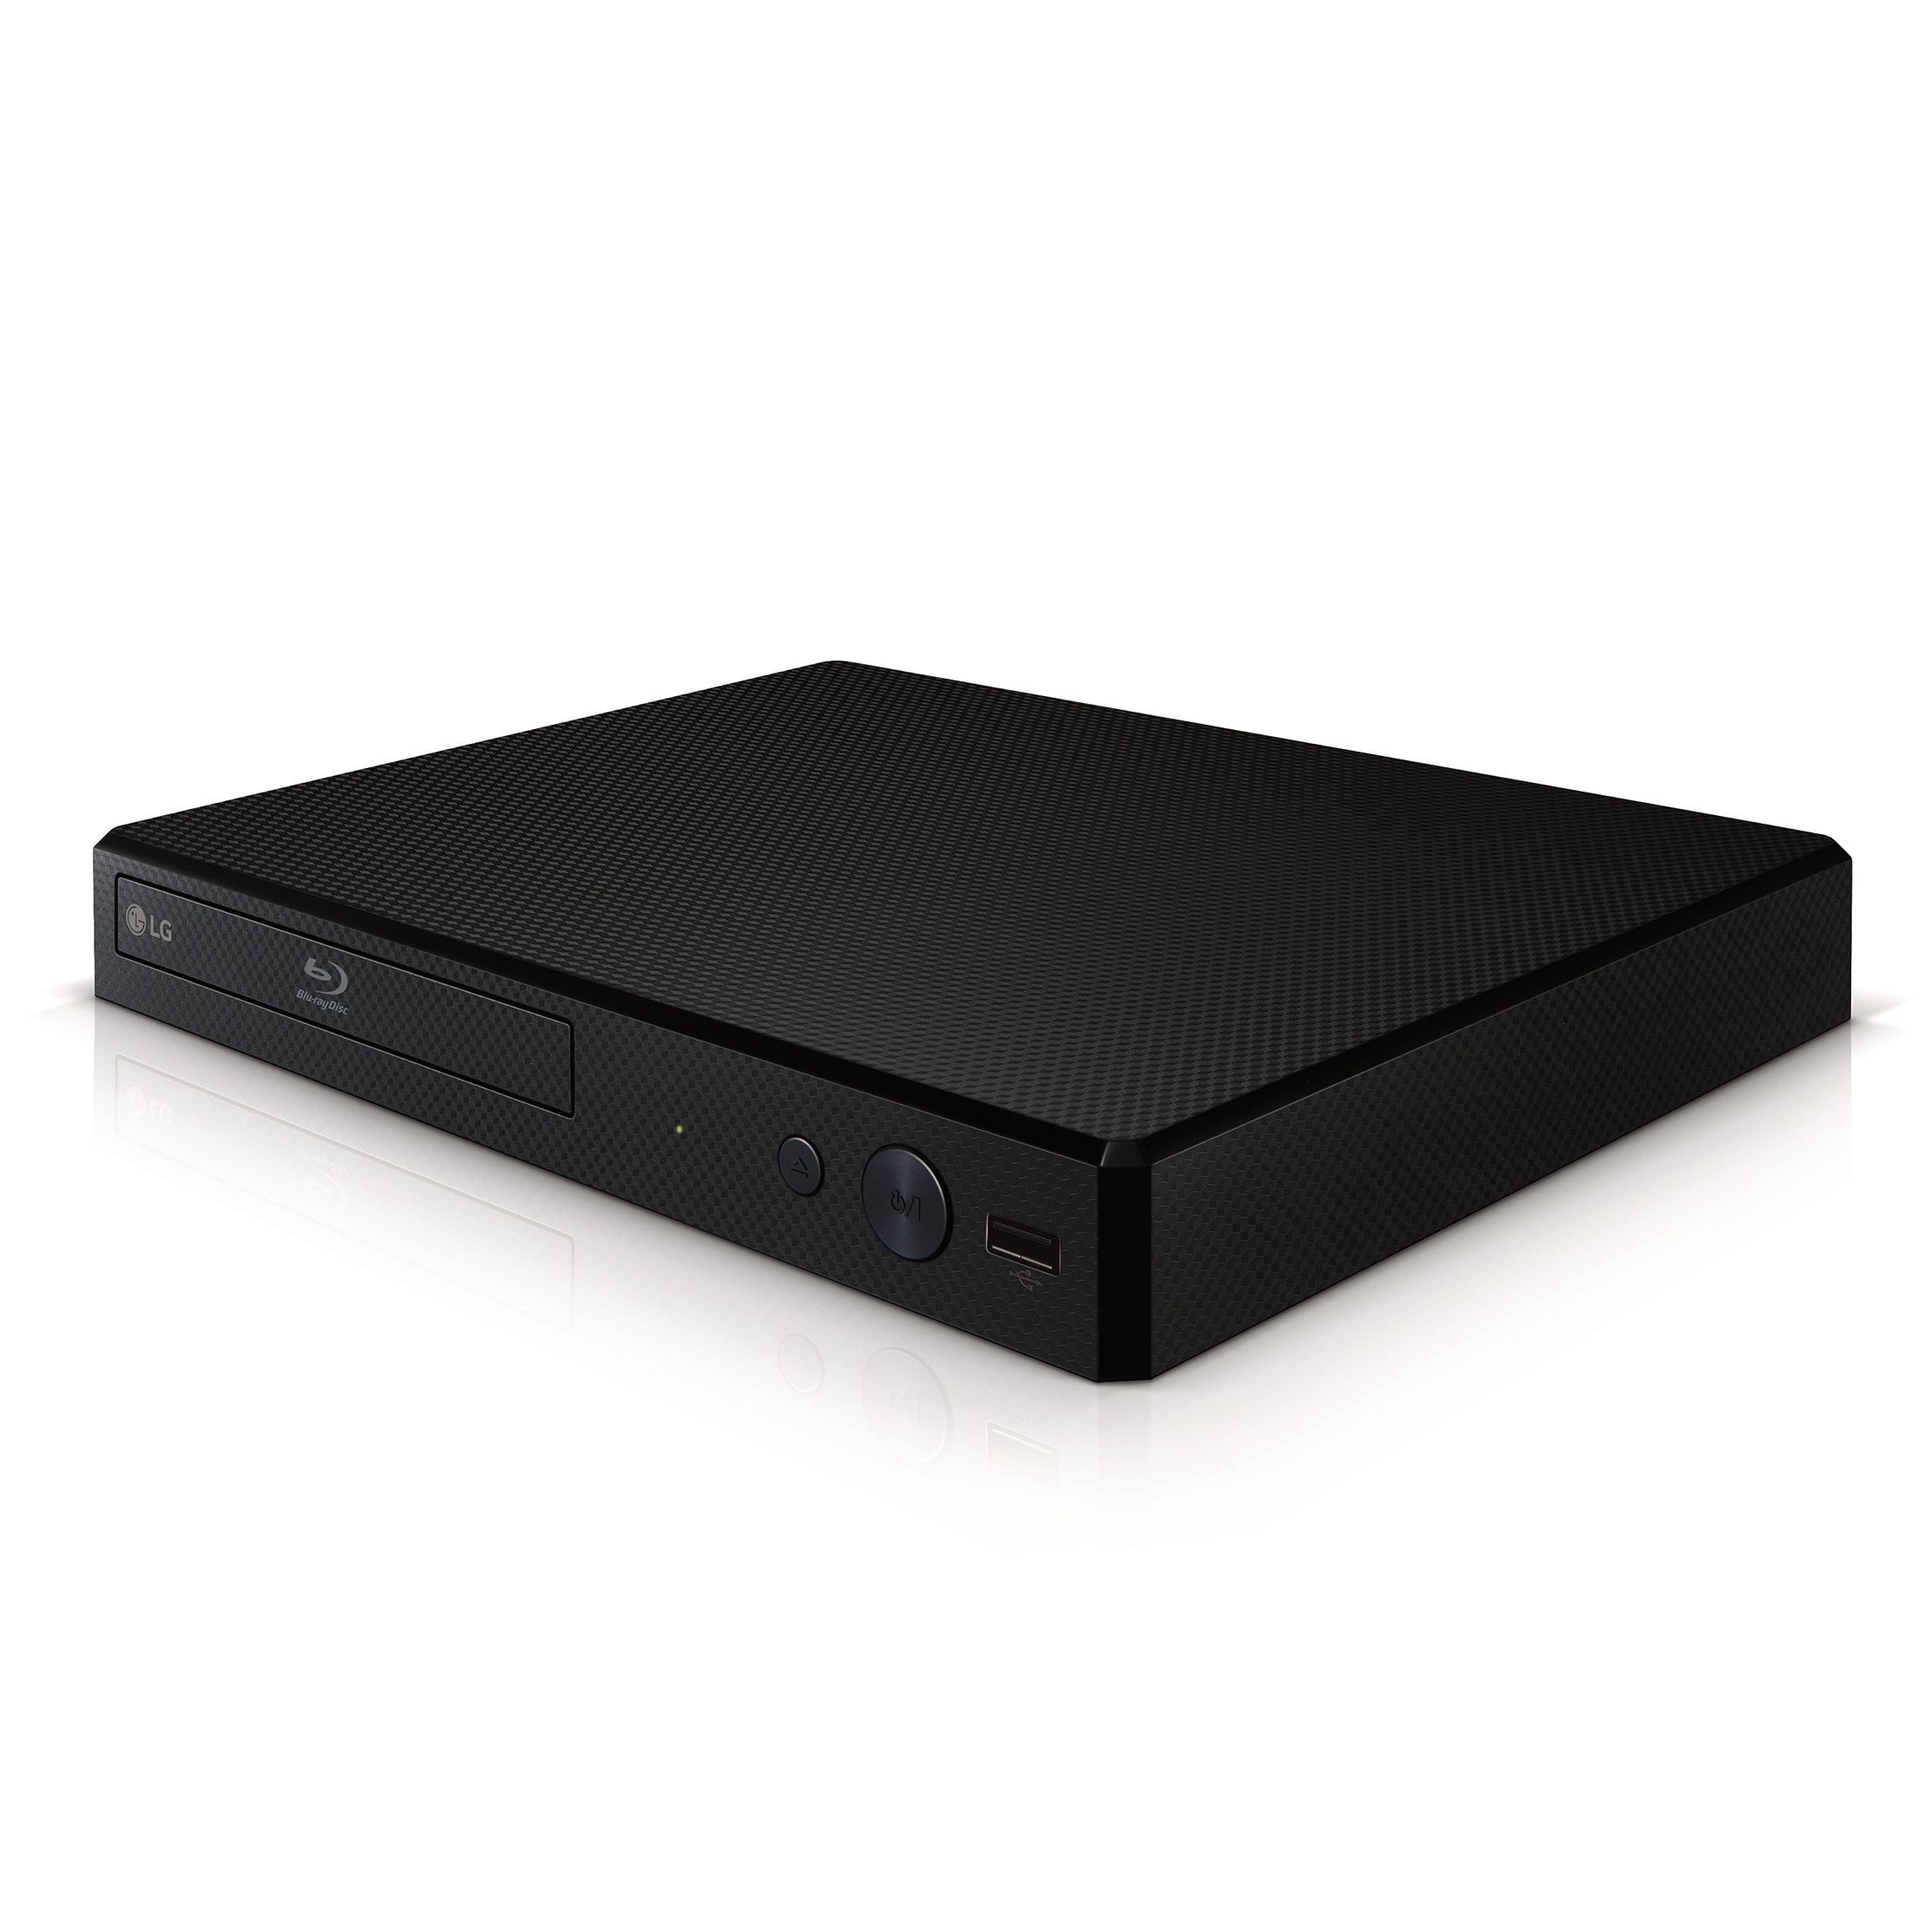 LG Blu-ray Player with Streaming Services - BPM25 - image 4 of 12